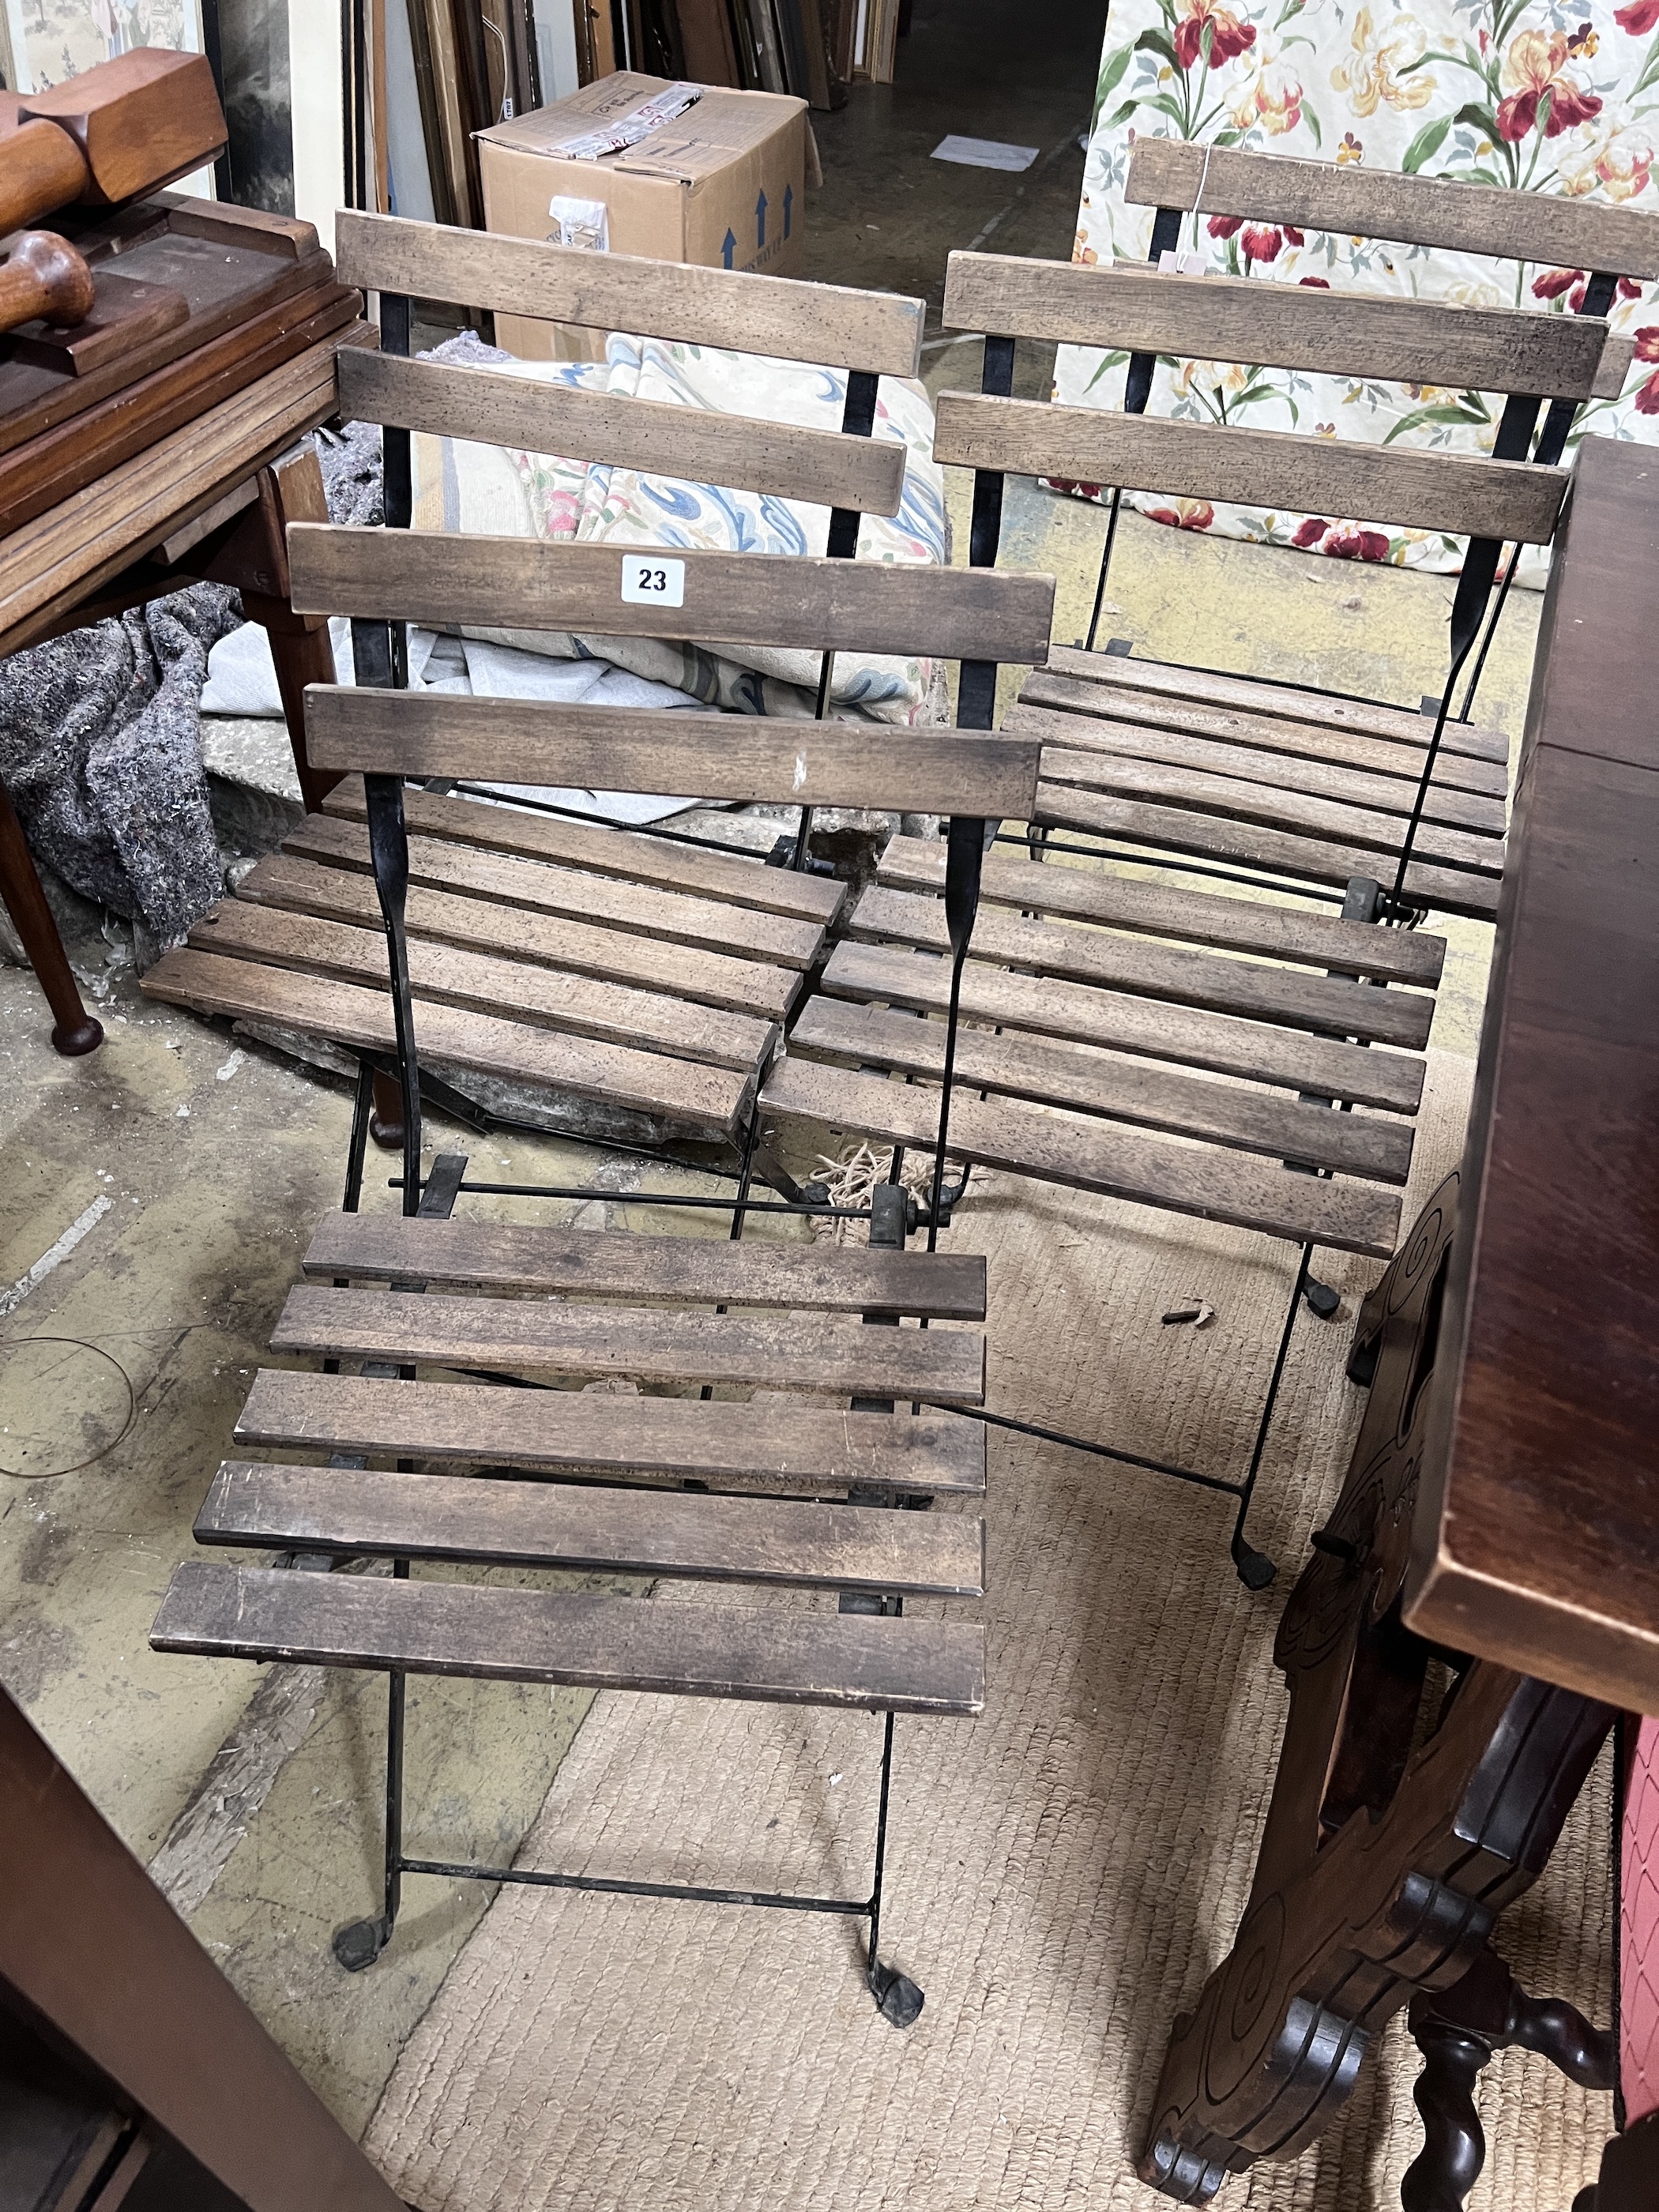 A set of four wrought iron slatted wood folding garden chairs                                                                                                                                                               